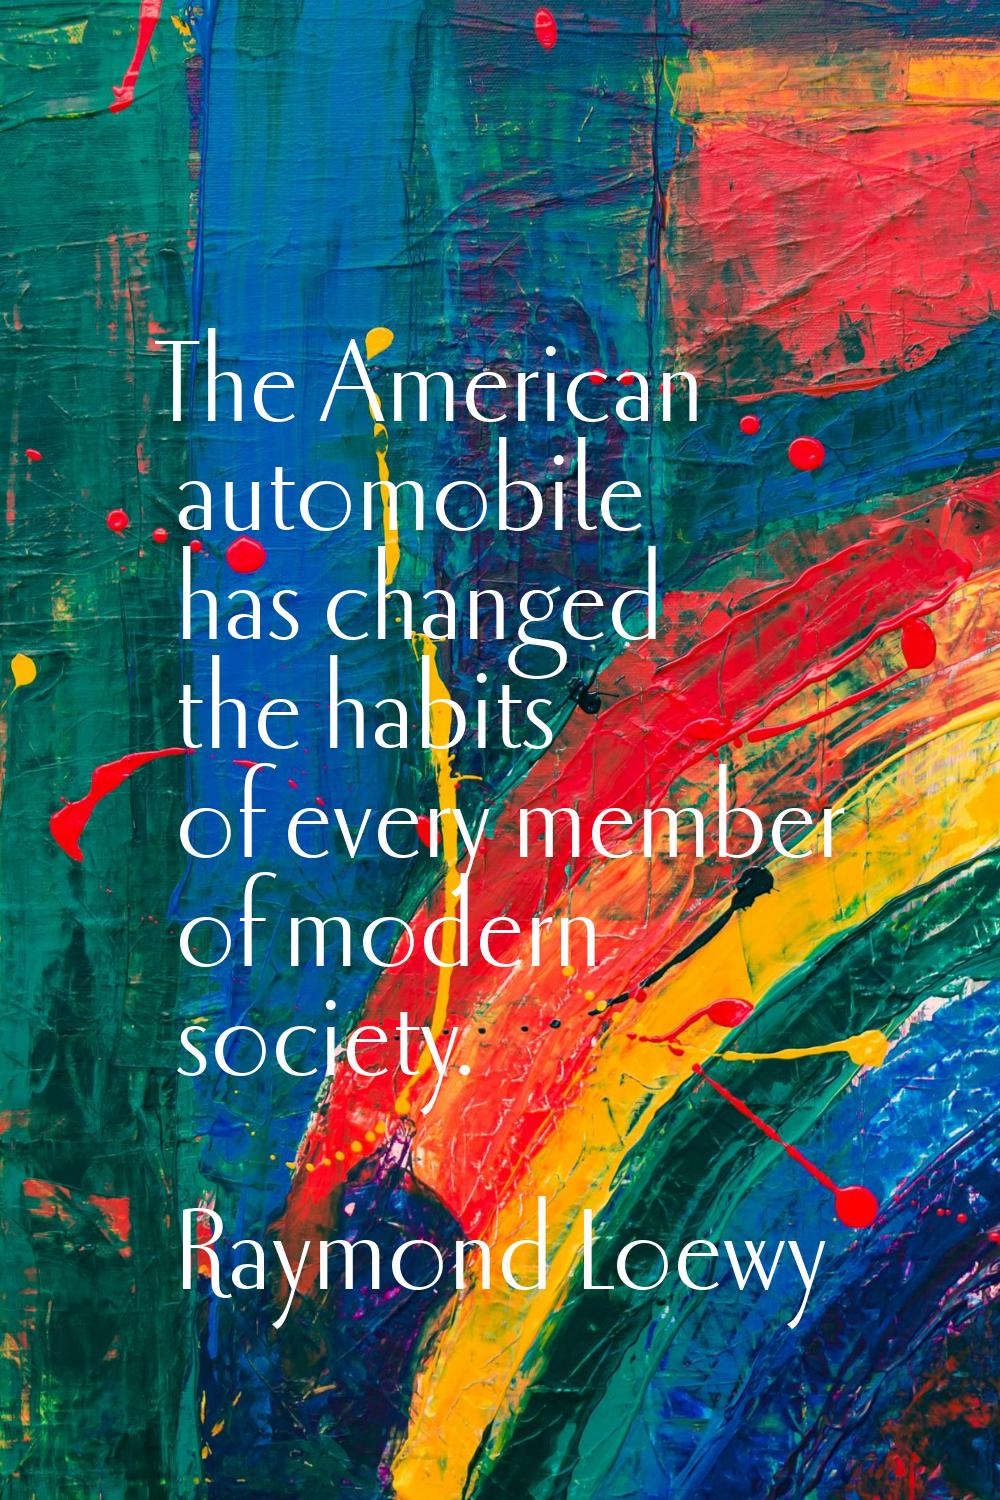 The American automobile has changed the habits of every member of modern society.